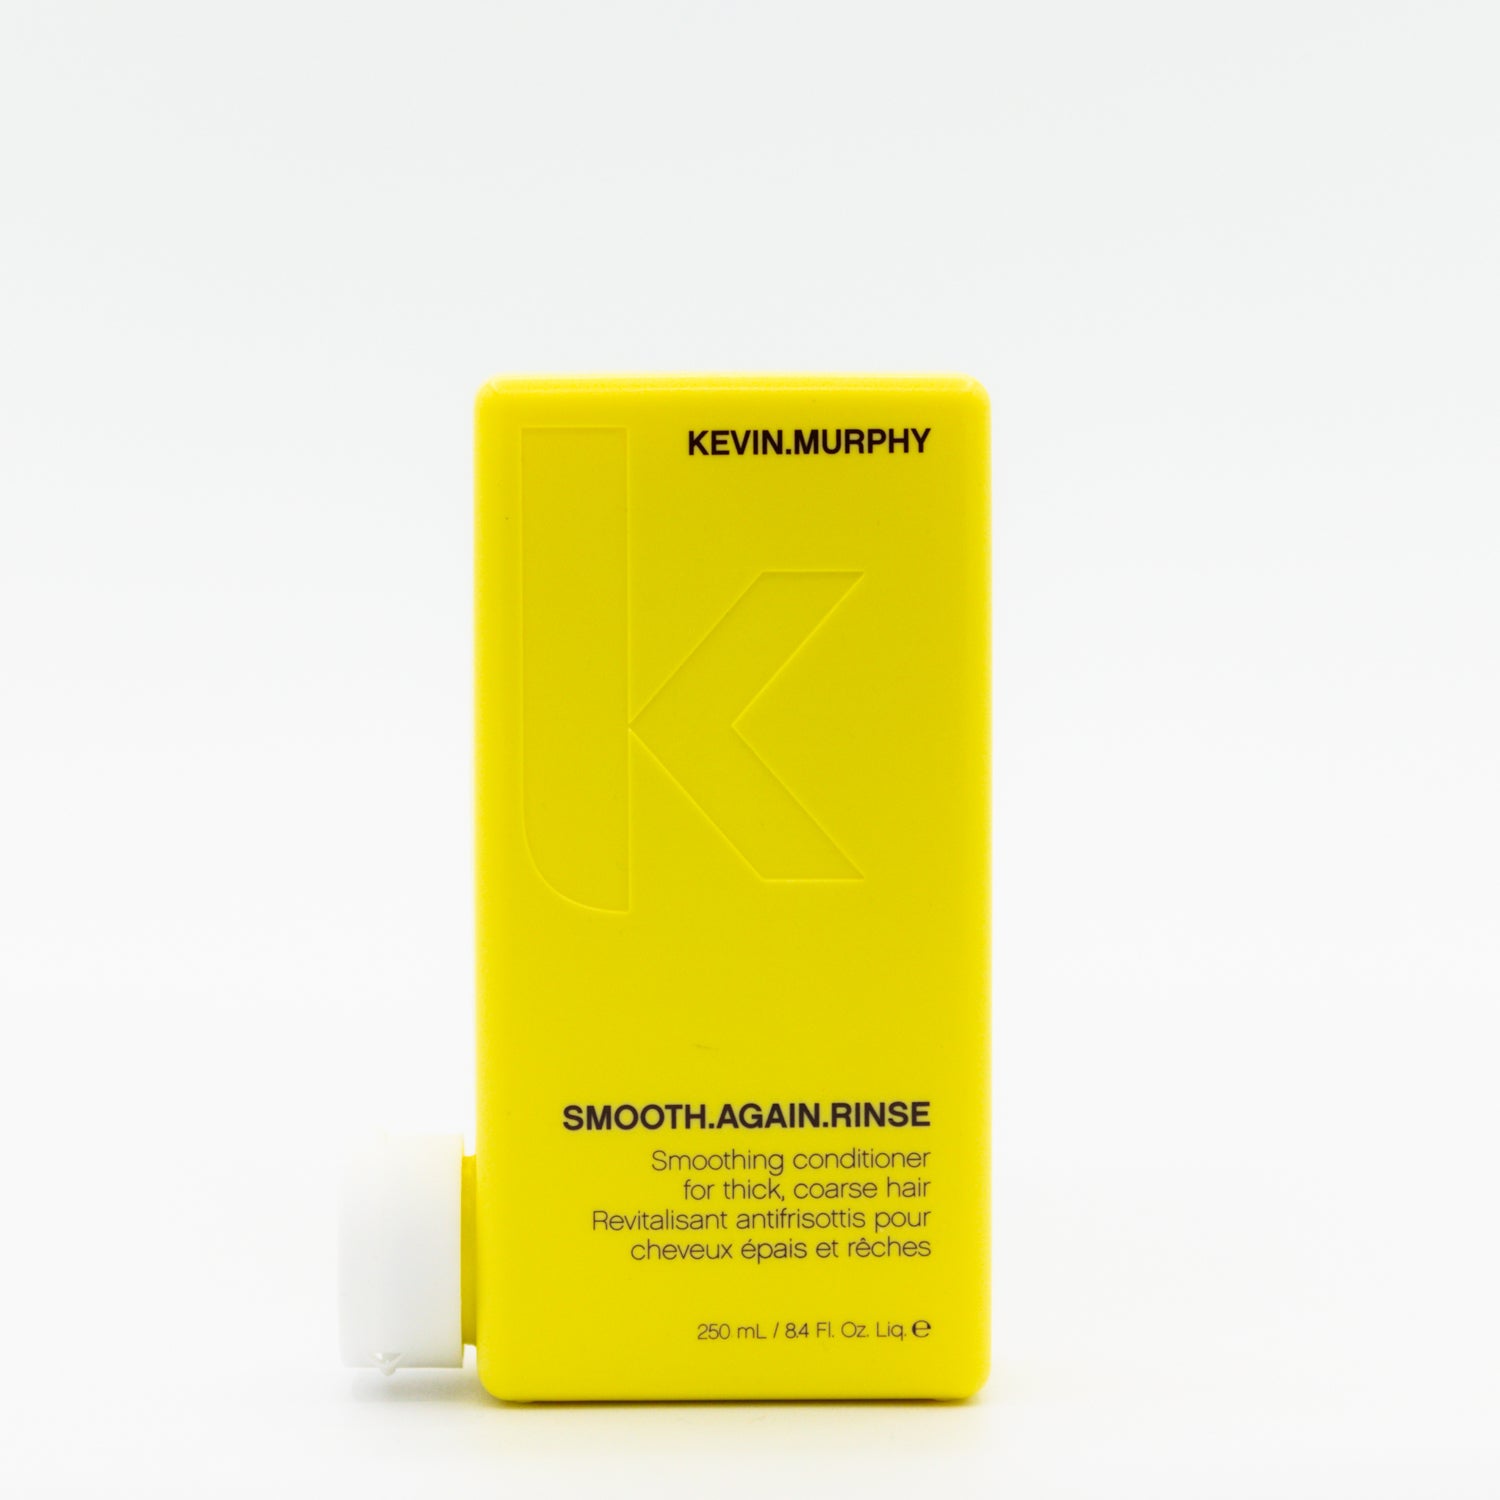 Kevin Murphy | Smooth.Again Rinse Conditioner